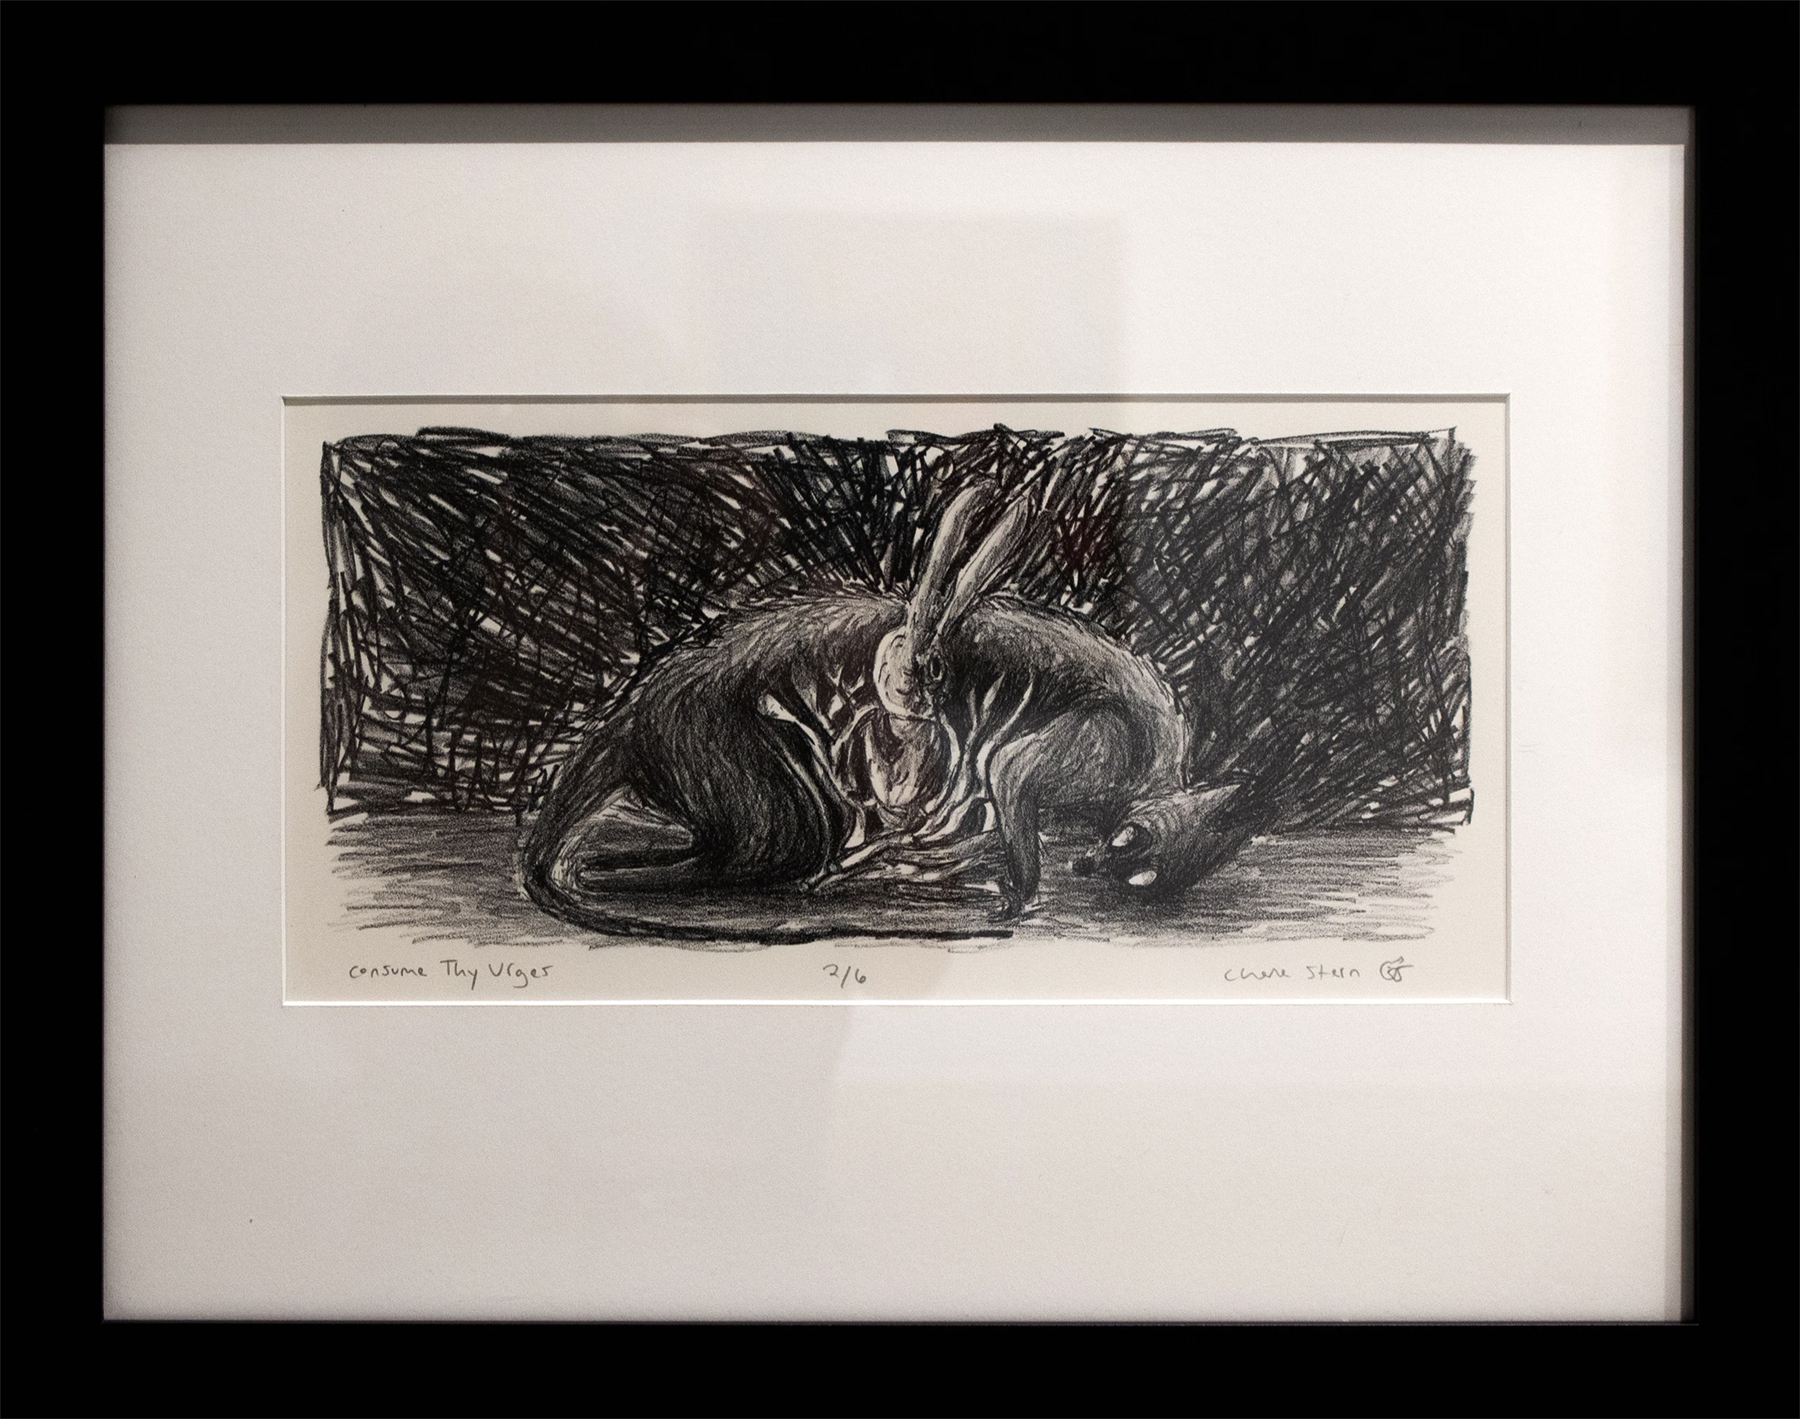 Black and white framed lithograph of a rabbit standing in the decaying body of an animal, courtesy of the artist 